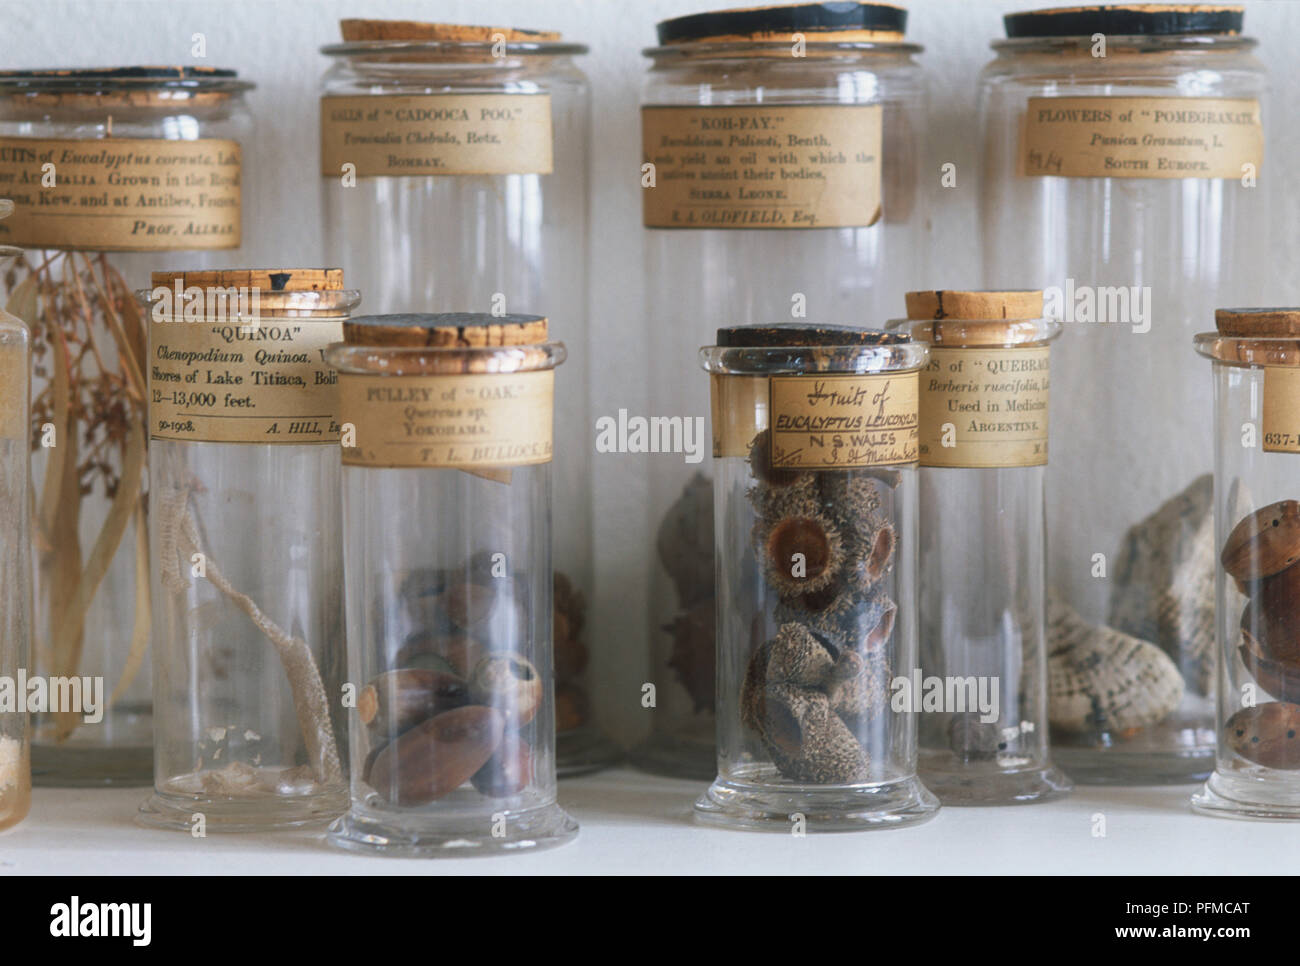 Old botanical specimen jars filled with nature finds, front view Stock Photo